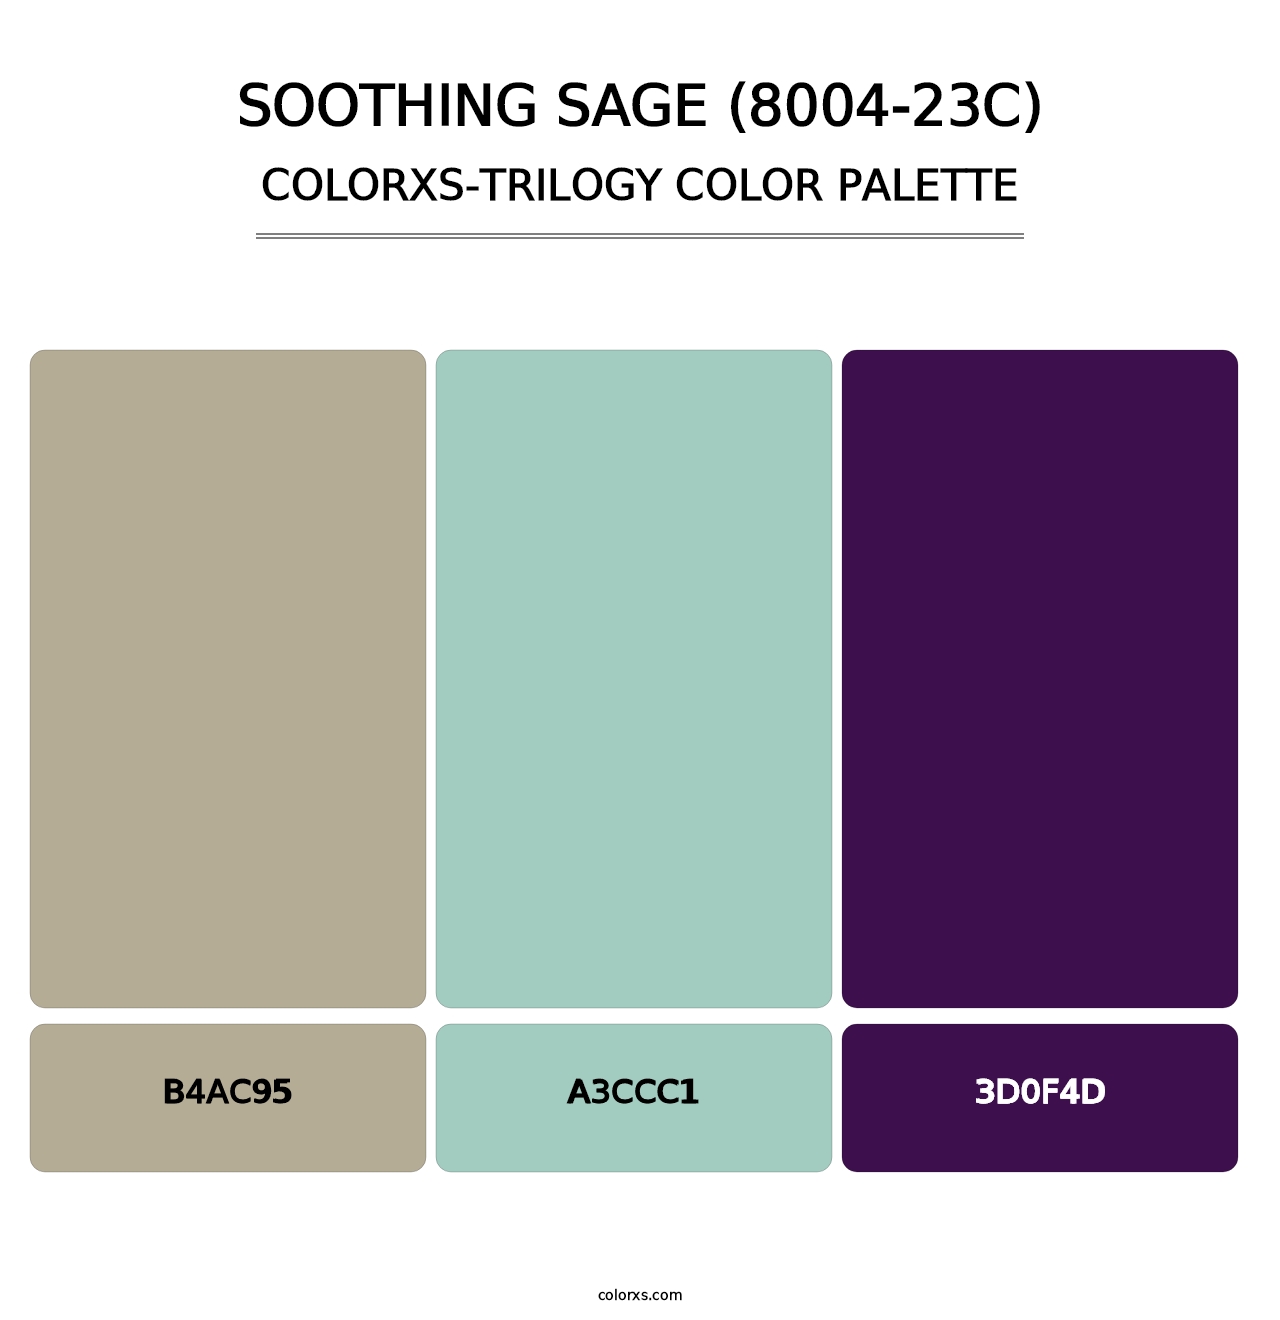 Soothing Sage (8004-23C) - Colorxs Trilogy Palette